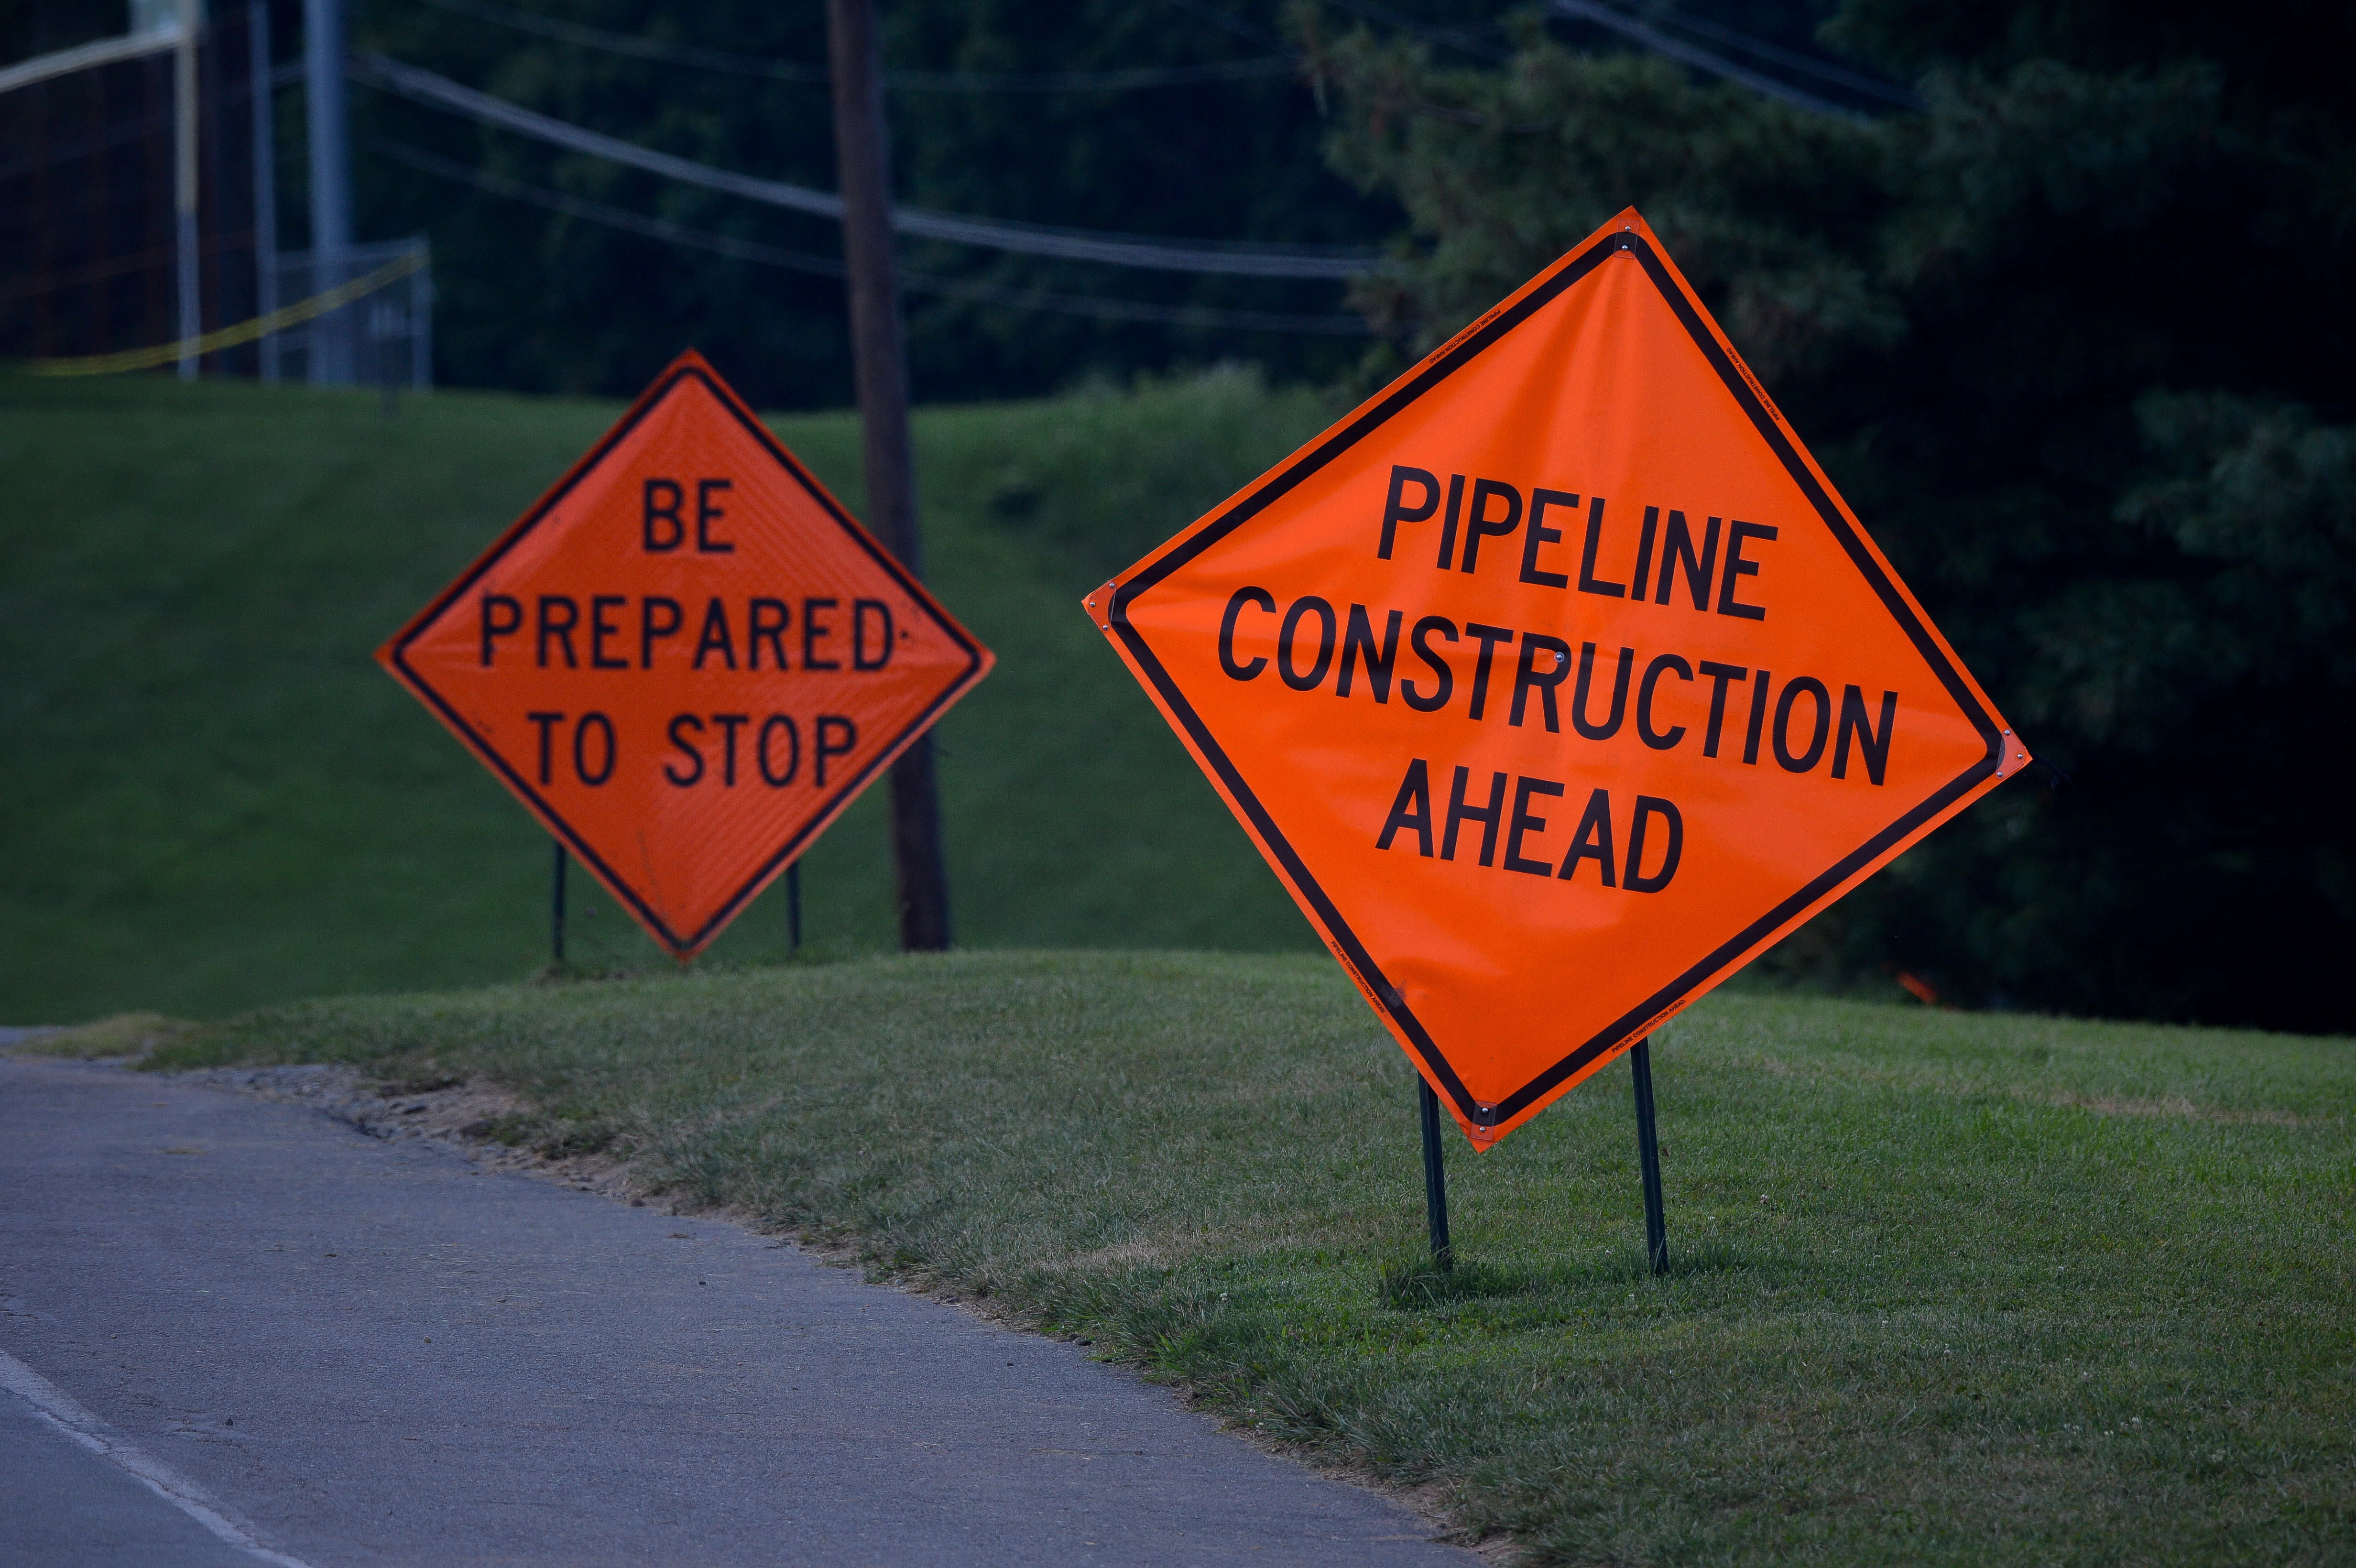 Construction work continues on Sunoco's Mariner East II natural gas pipeline near Morgantown